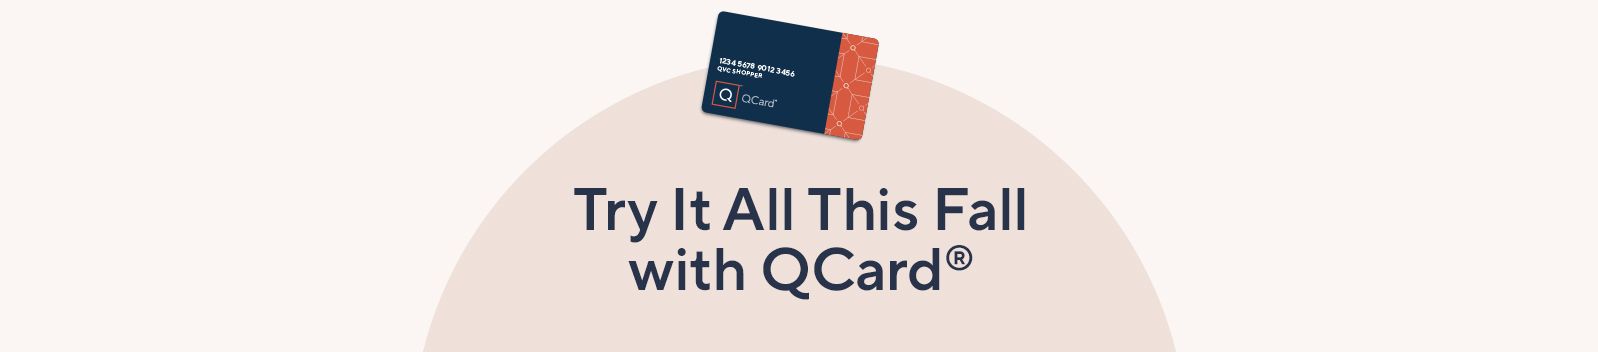 Try It All This Fall with QCard®